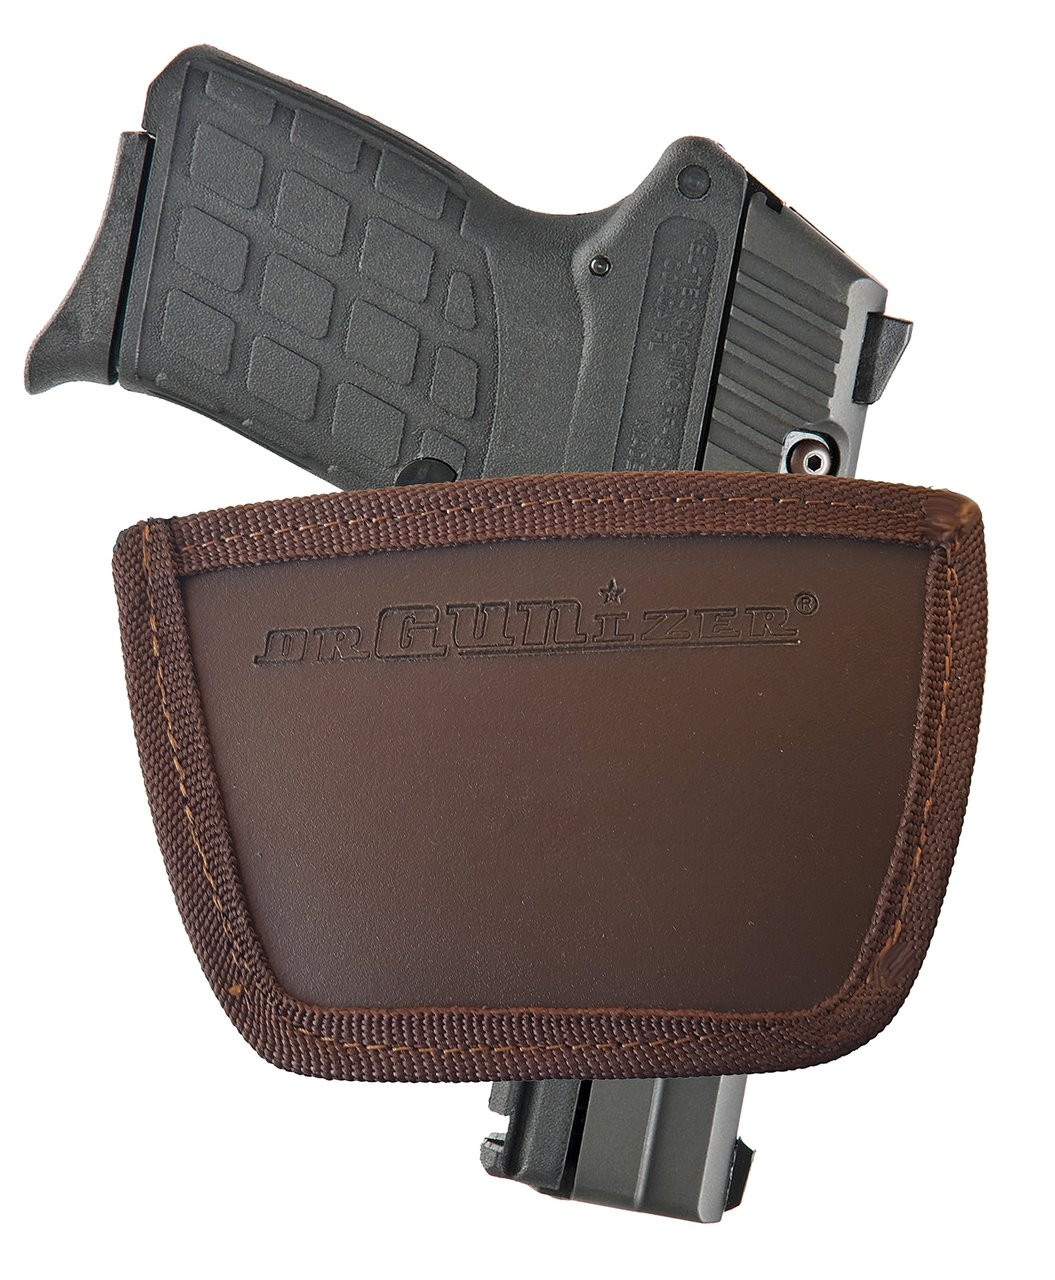 Garrison Grip Leather Inside and Outside Waistband Easy Slide Holster Fits Kel-Tec PF9 Brown